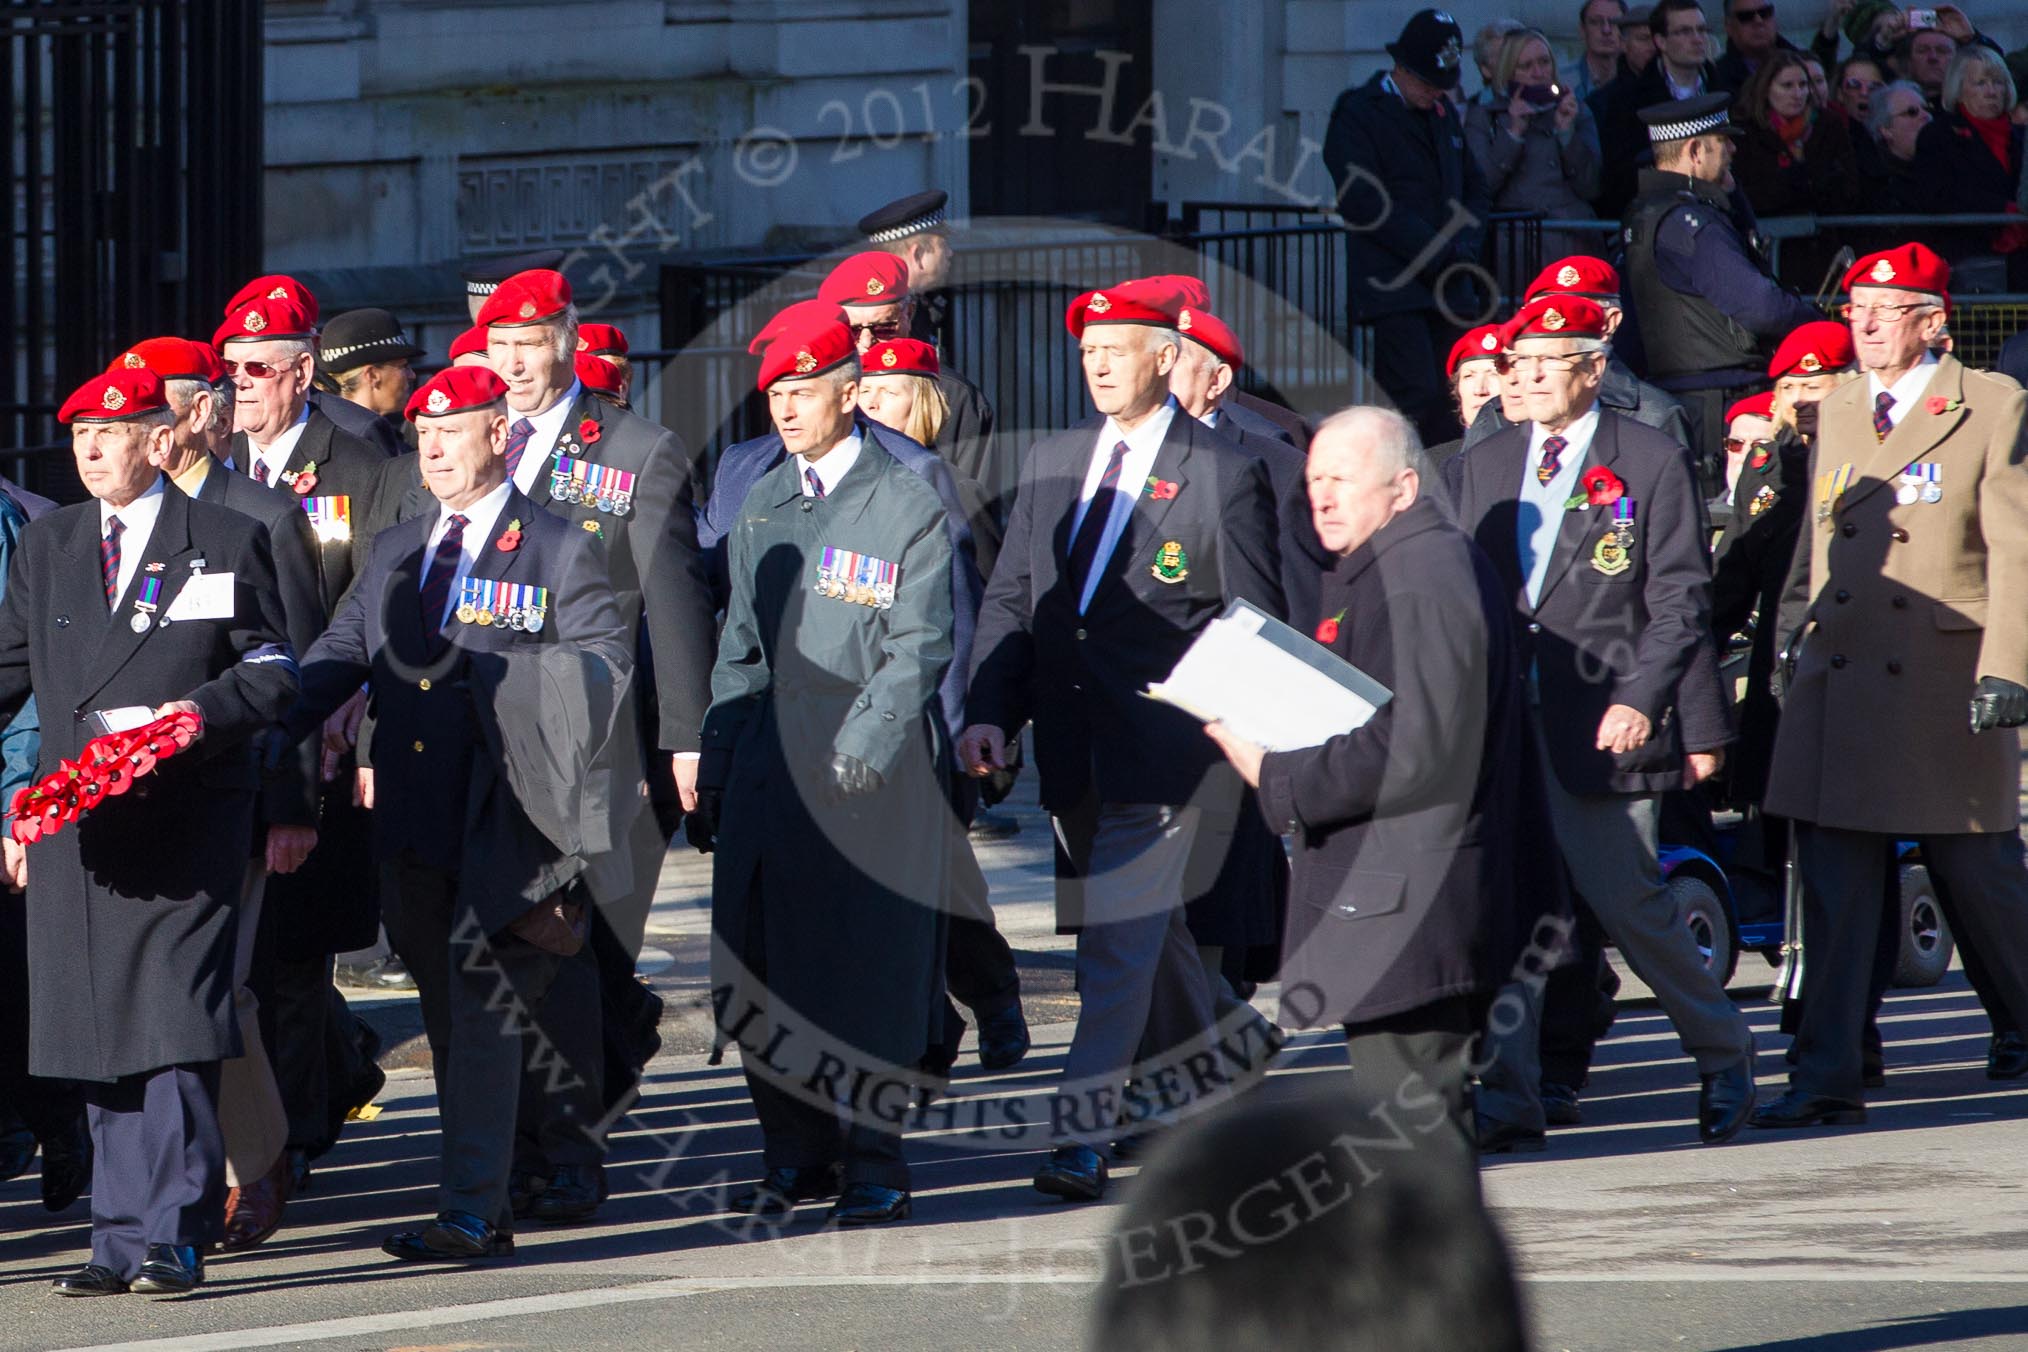 Remembrance Sunday 2012 Cenotaph March Past: Group B3, Royal Military Police Association..
Whitehall, Cenotaph,
London SW1,

United Kingdom,
on 11 November 2012 at 11:55, image #820